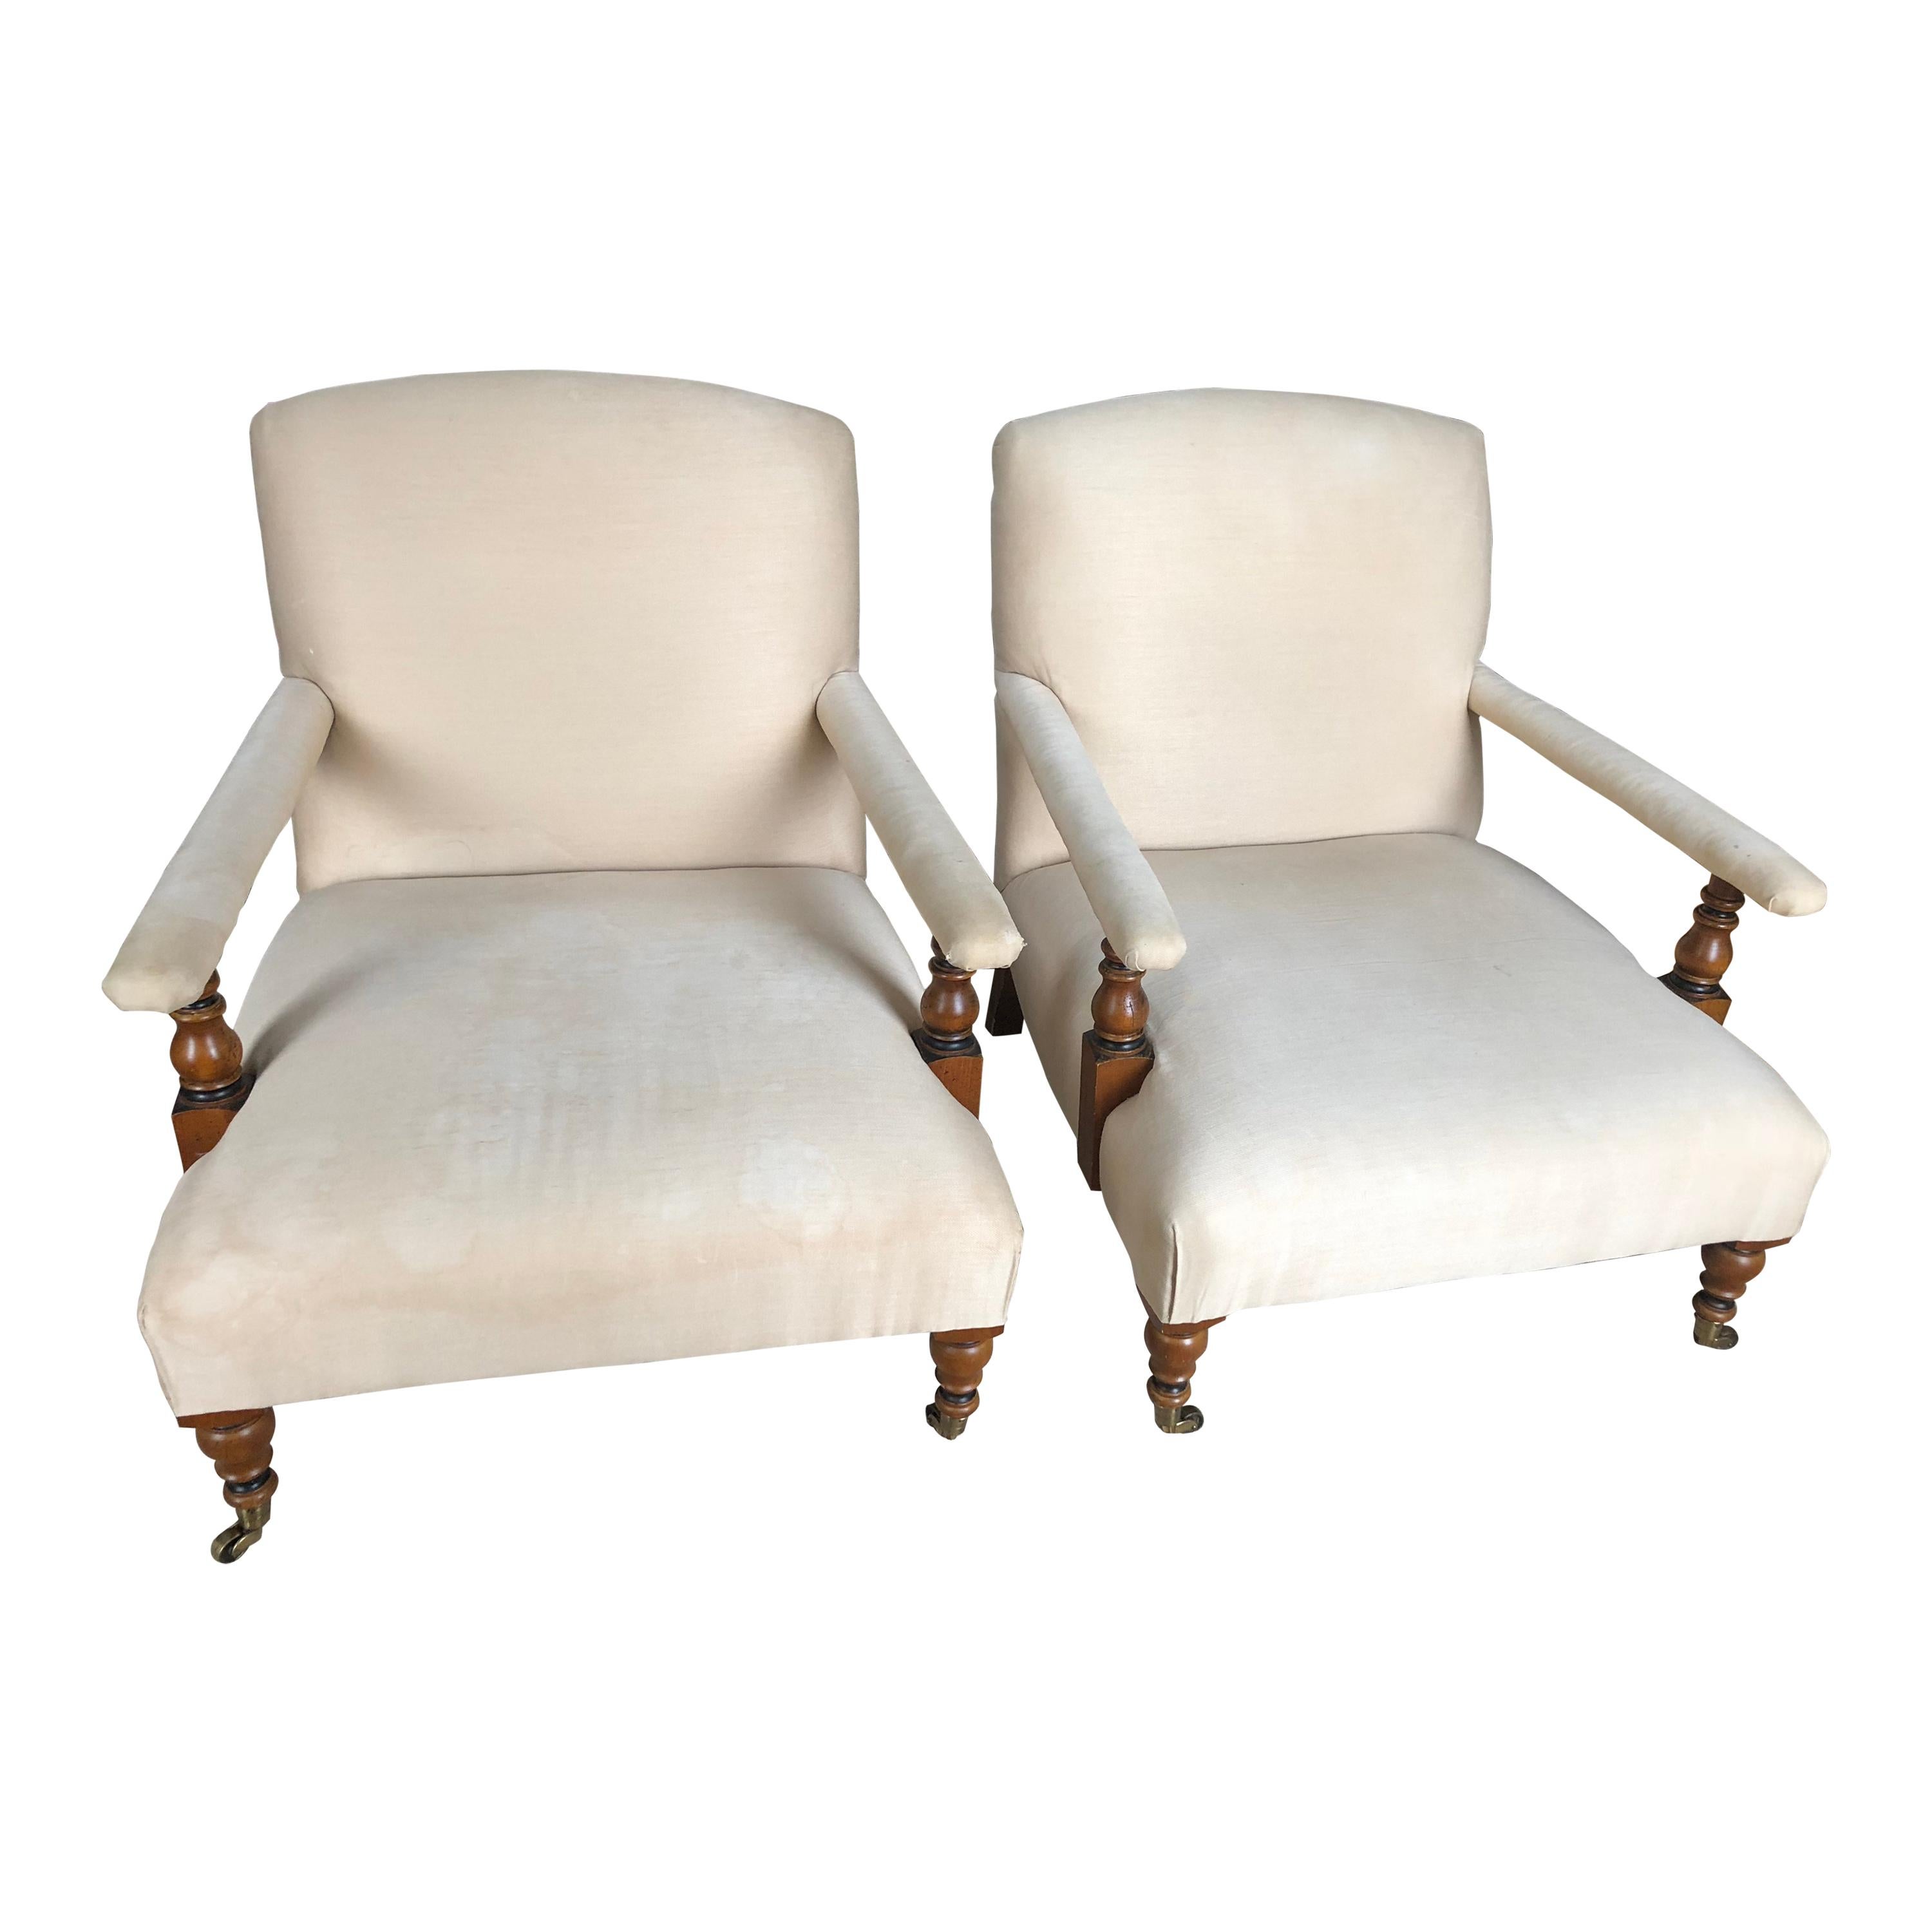 Pair of Ralph Lauren Oliver Library Club Chairs with Great Bones